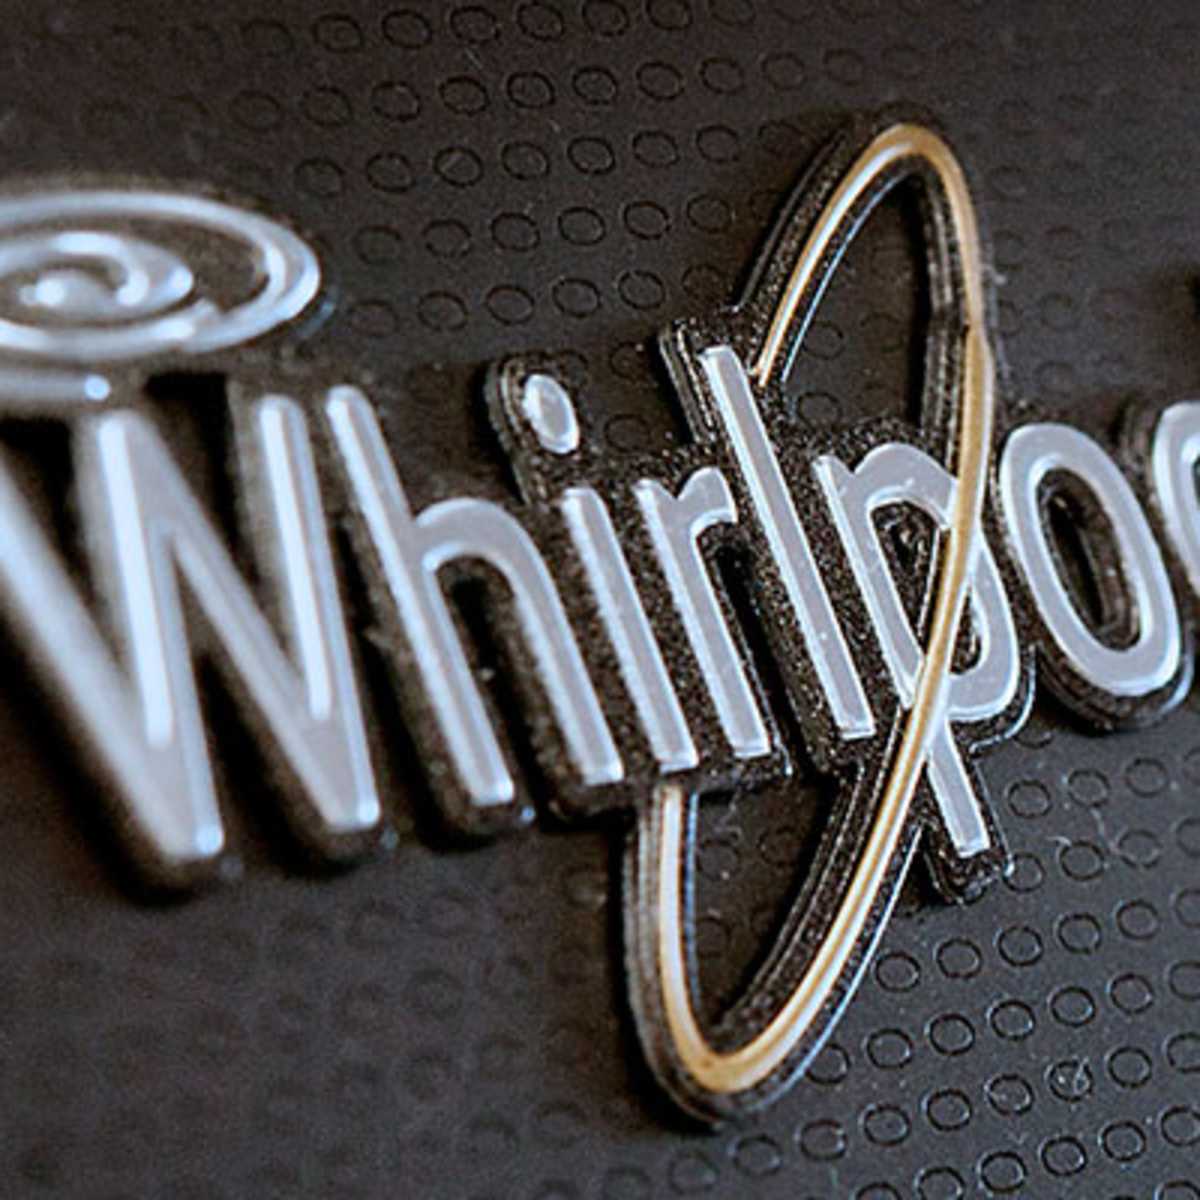 Whirlpool Corporation | A Leading Name In Household Appliances